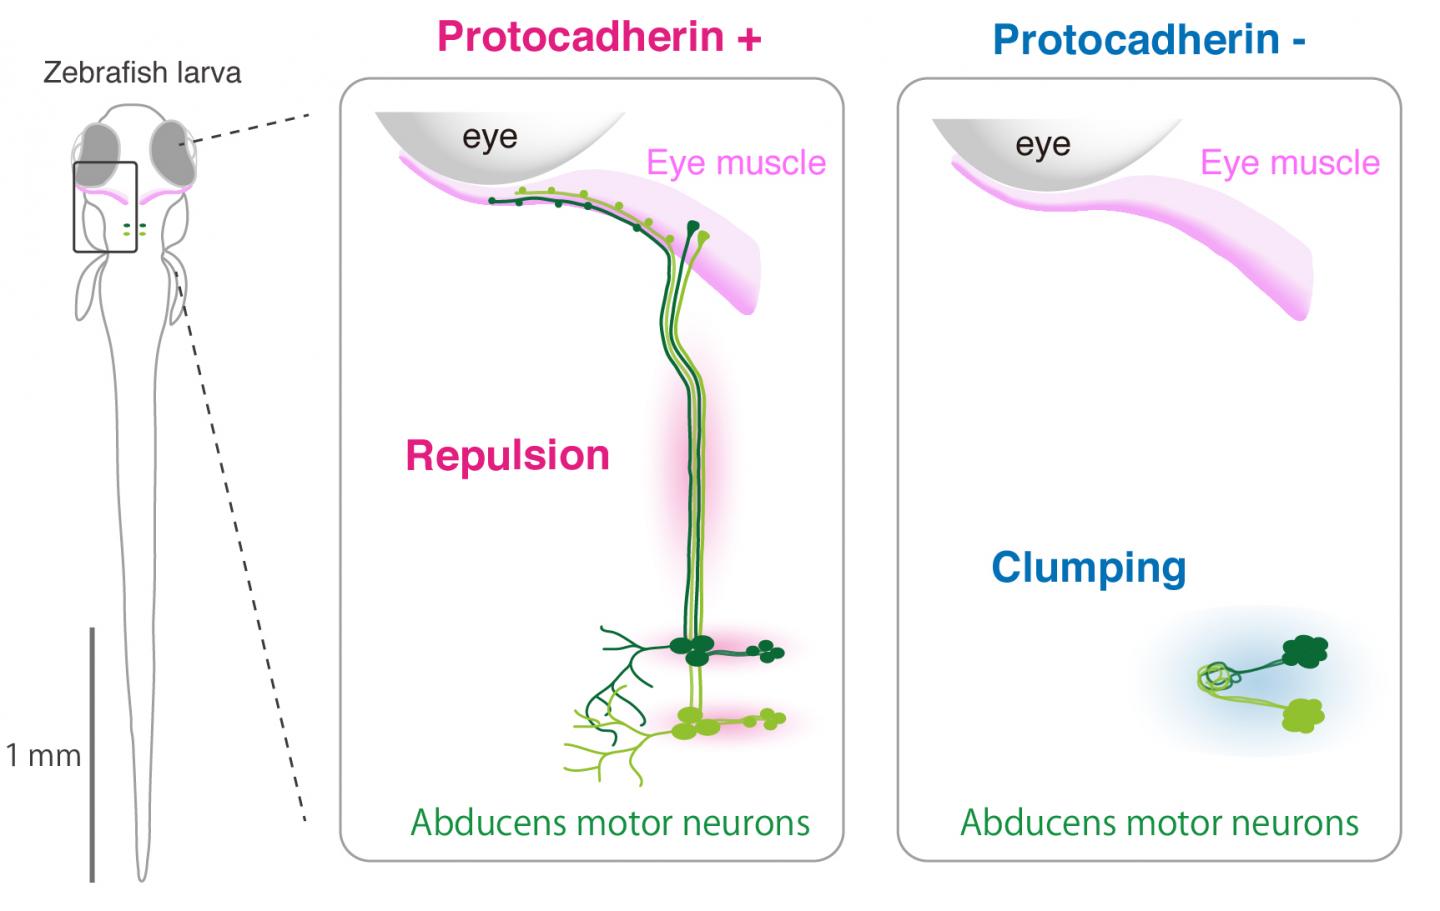 A Role of Protocadherin